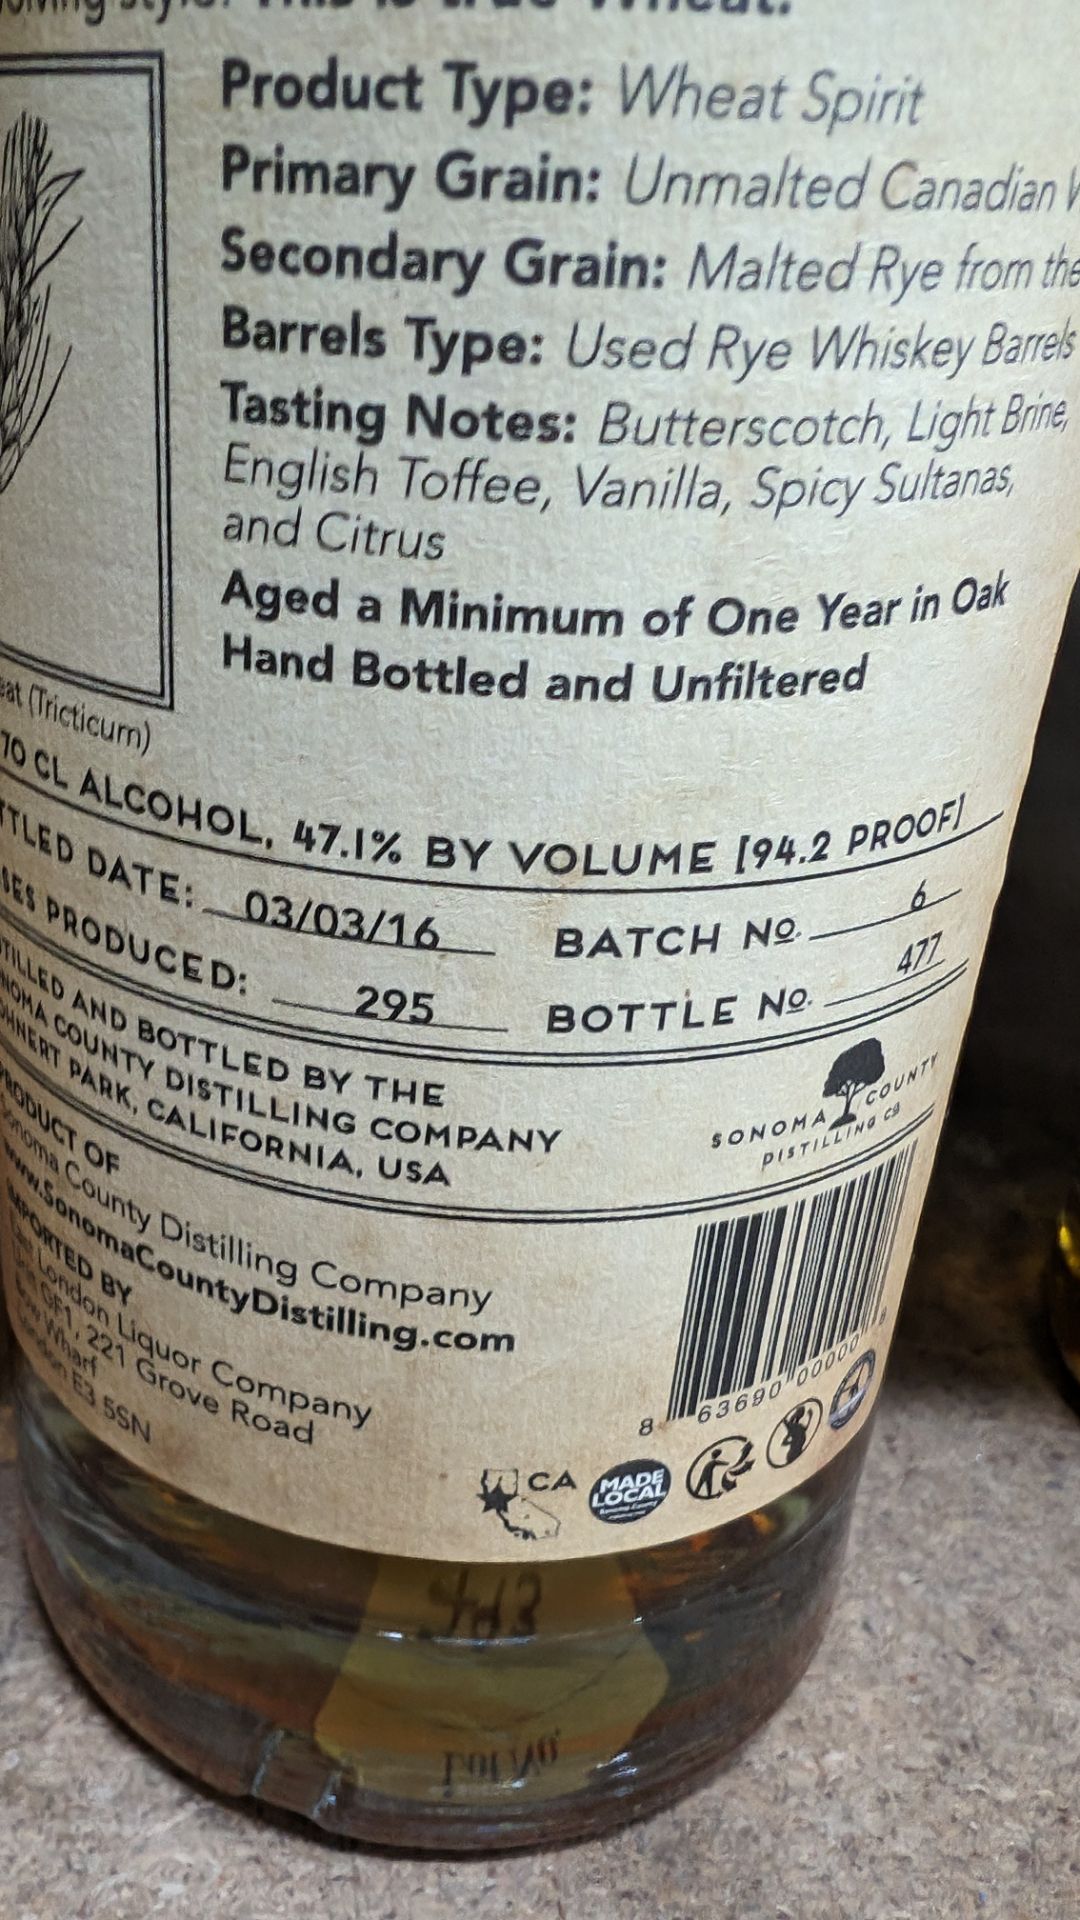 1 off 700ml bottle of Sonoma County 2nd Chance Wheat Double Alembic Pot Distilled Whiskey. 47.1% al - Image 5 of 5